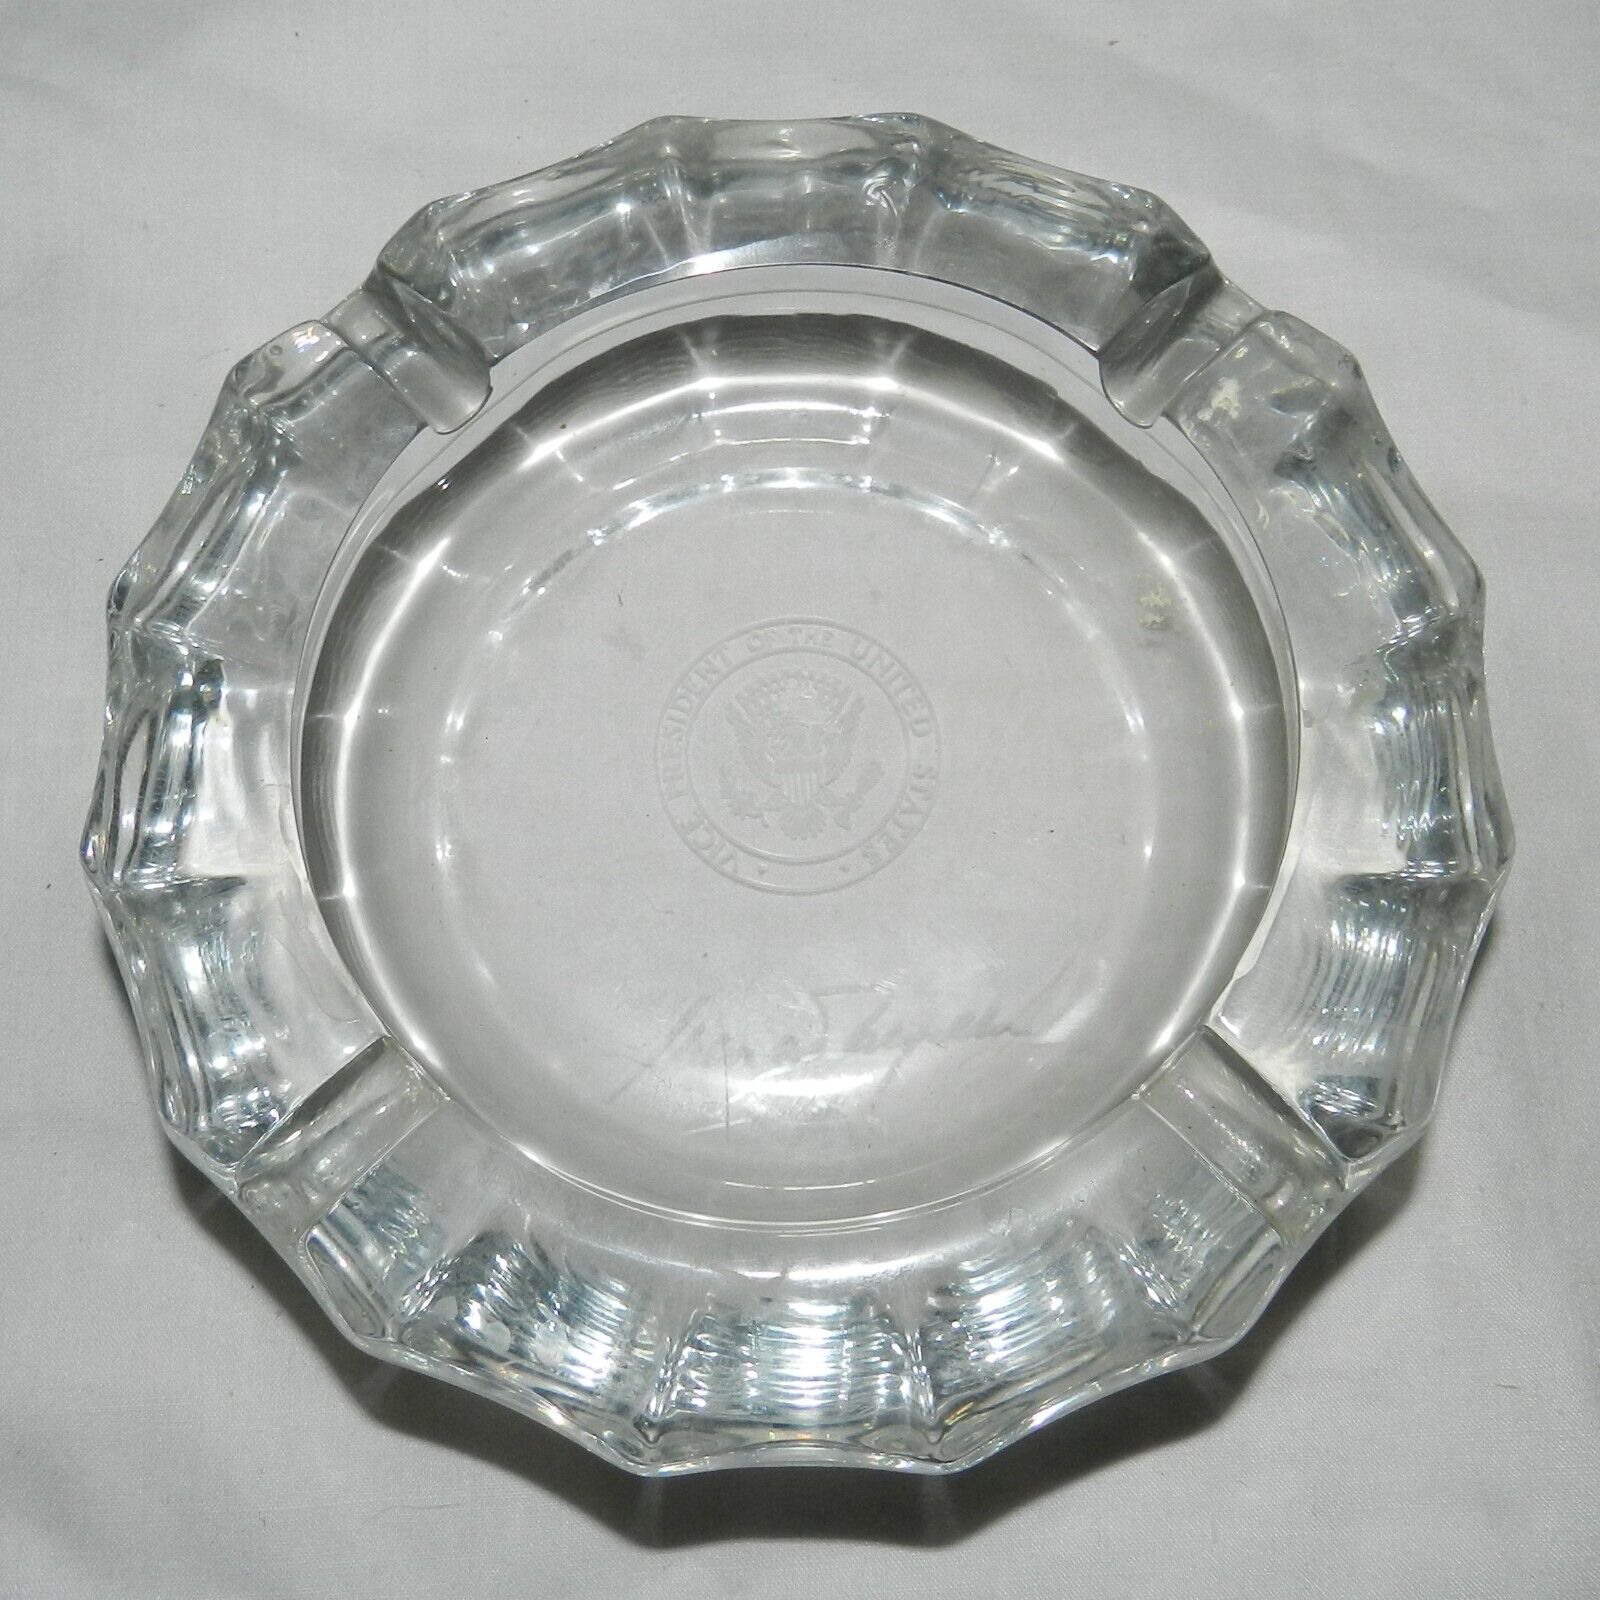 Vintage Glass Ashtray With Vice President\'s seal + Nelson Rockefeller signature